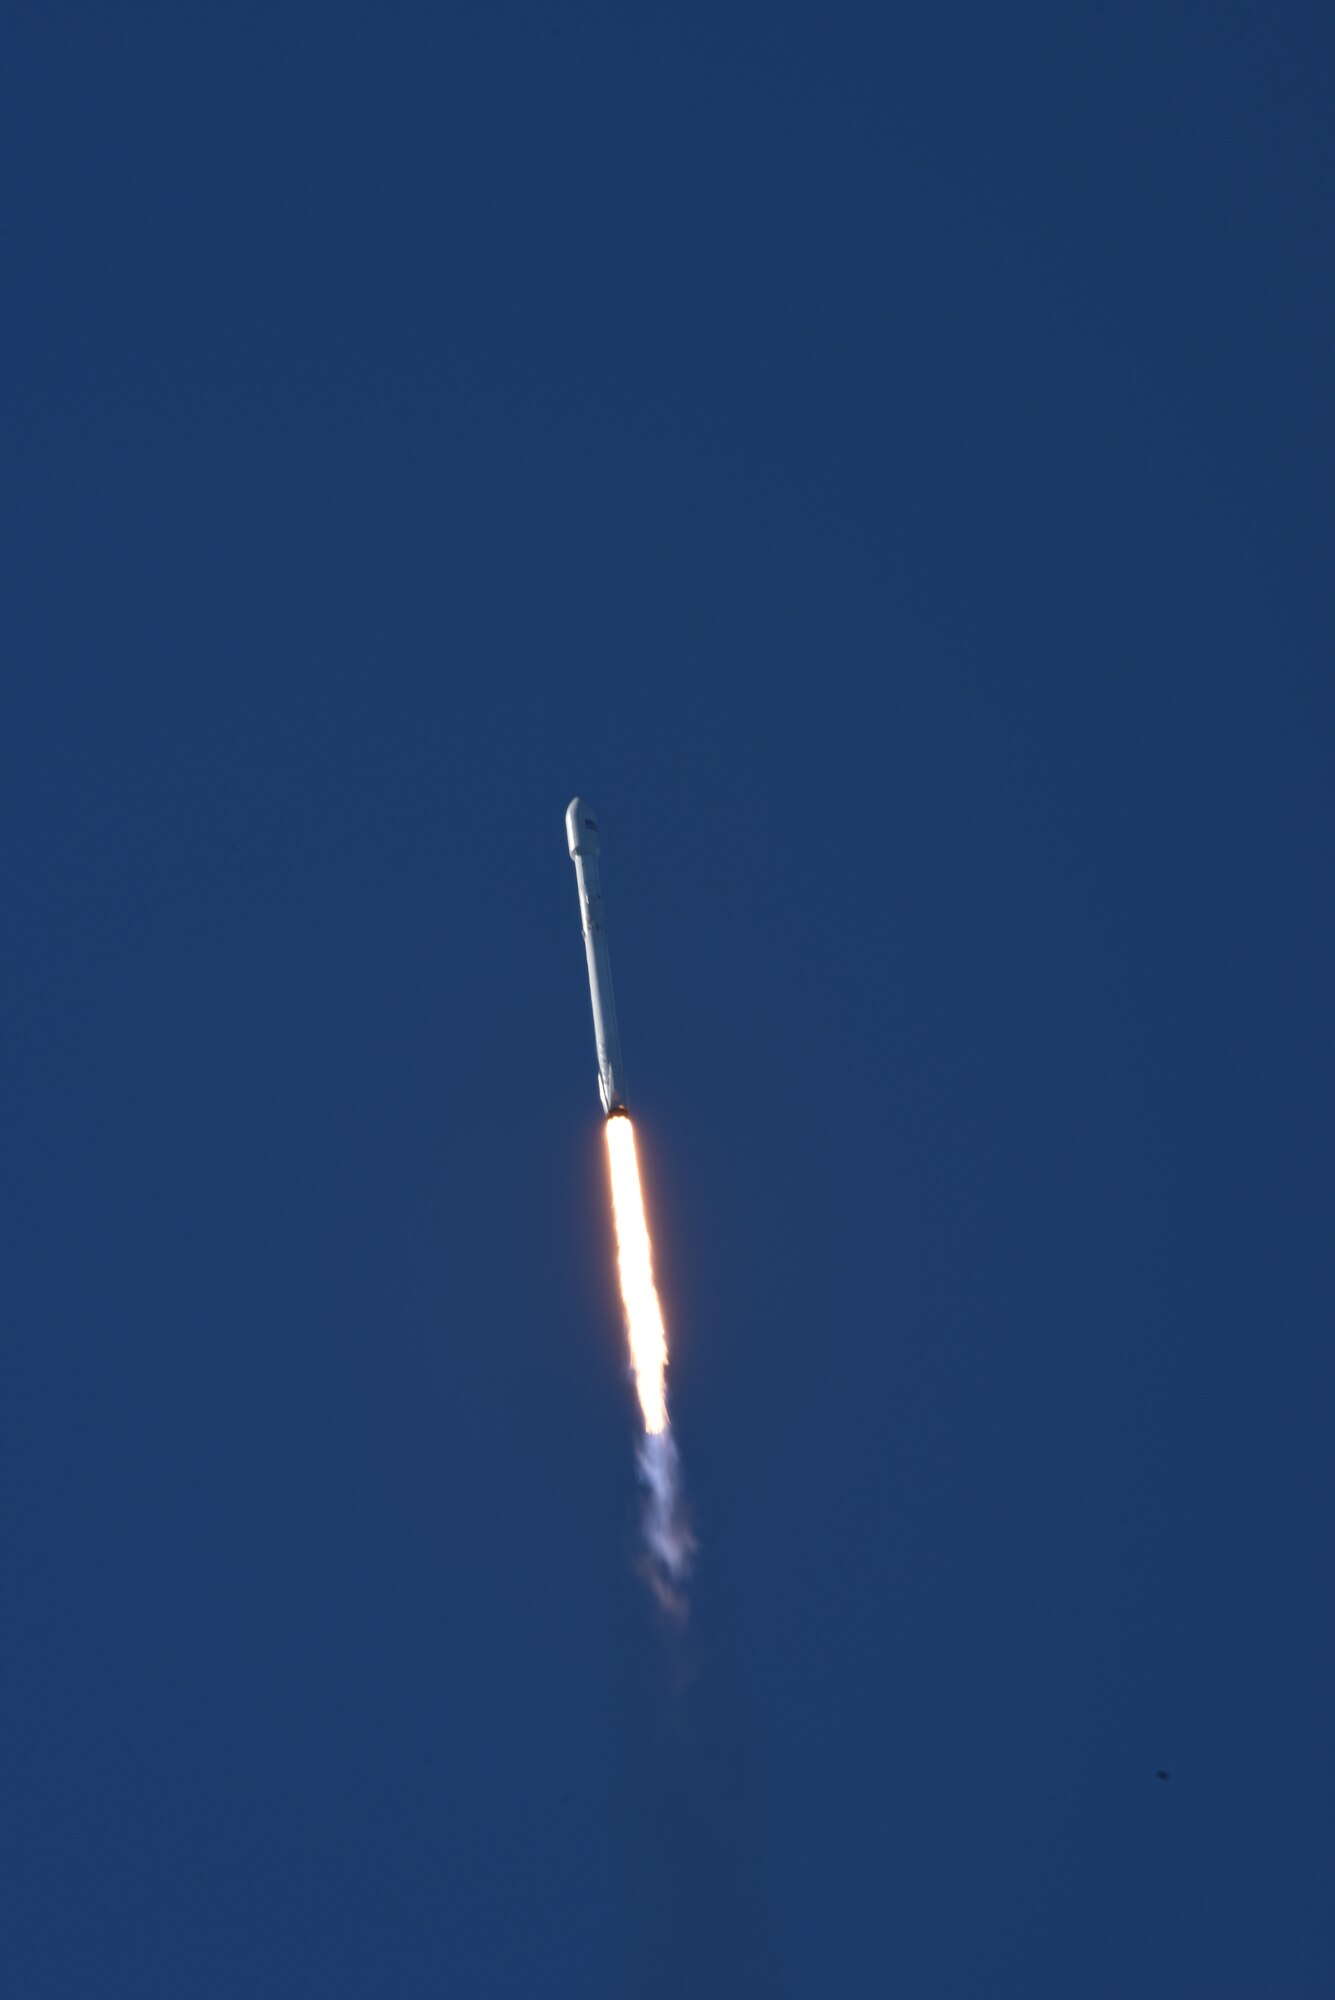 A SpaceX Falcon 9 rocket with an Iridium NEXT satellite launches from Space Launch Complex-4, Jan. 14, 2017, Vandenberg Air Force Base Calif. Iridium NEXT will replace the world’s largest commercial satellite network of low-earth orbit satellites in what will be one of the largest “tech upgrades” in history. With multiple organizations working toward the same goal of mission success, strong working relationships among organizations are paramount. (U.S. Air Force photo by Senior Airman Ian Dudley/Released)